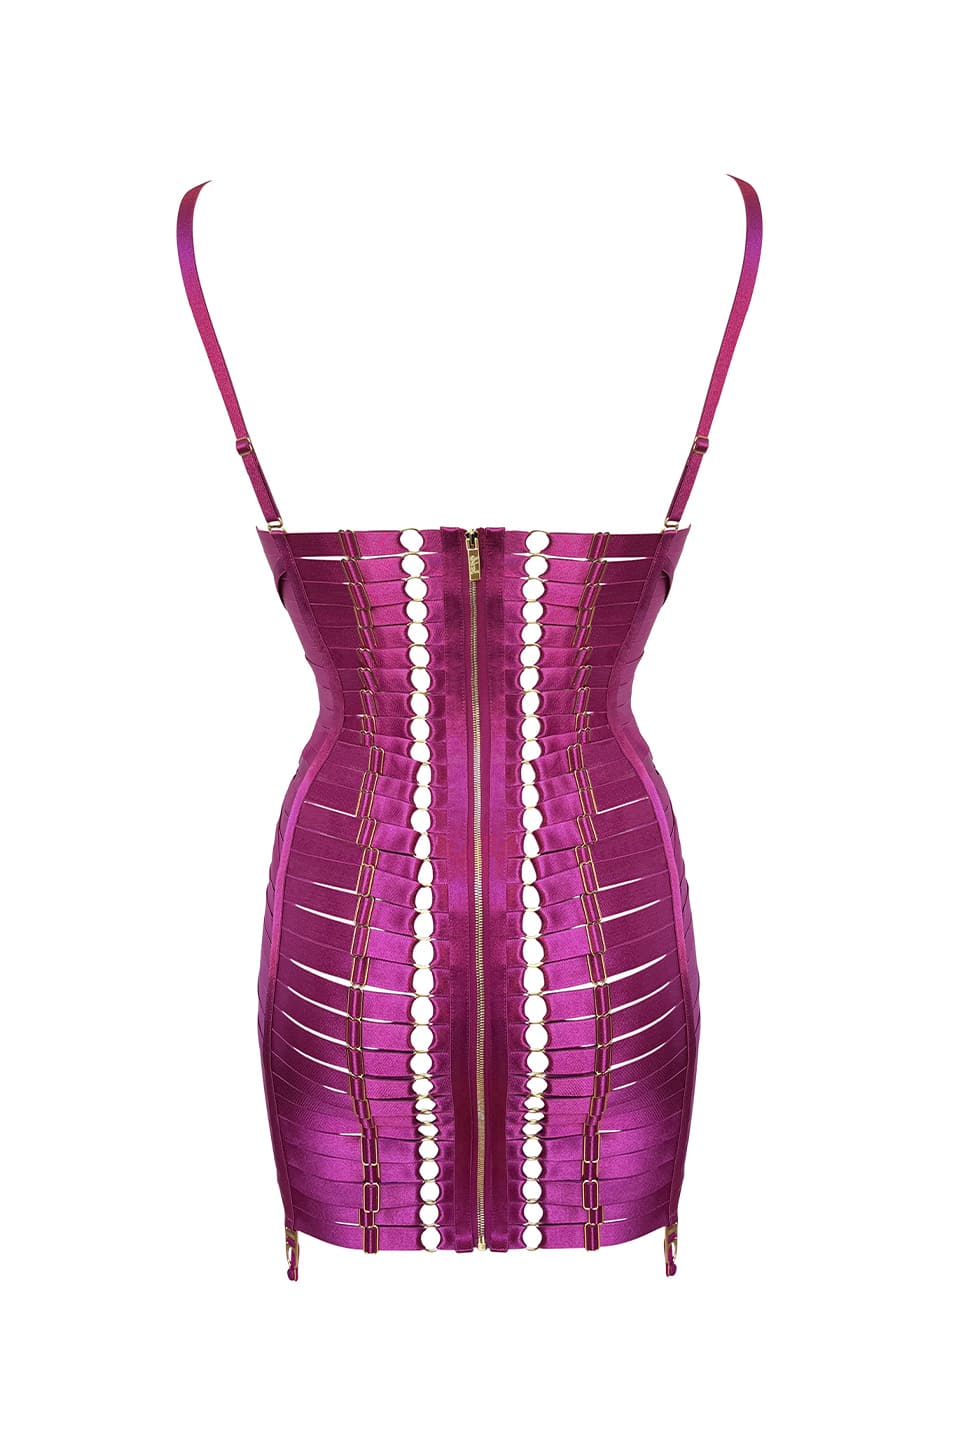 Designer Pink Bodies & corsets, shop online with free delivery in UAE. Product gallery 2